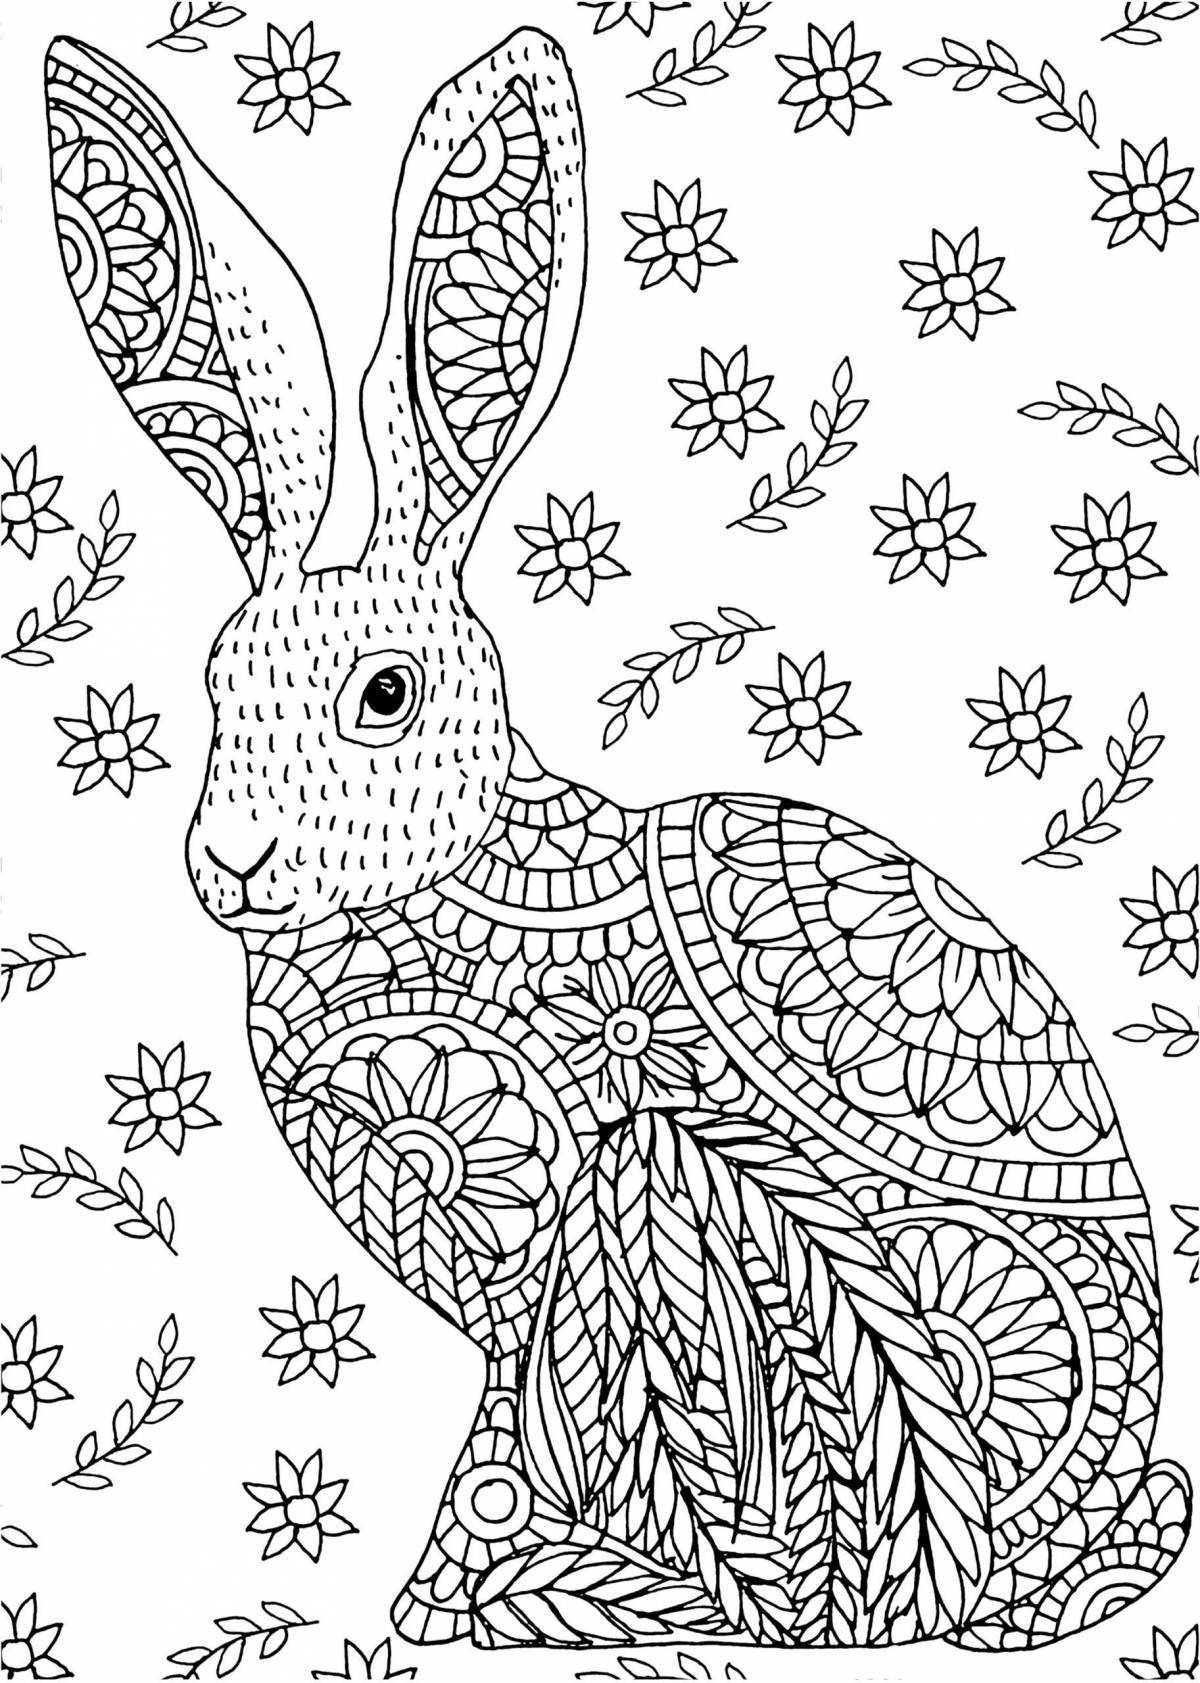 Live coloring page bunny antistress